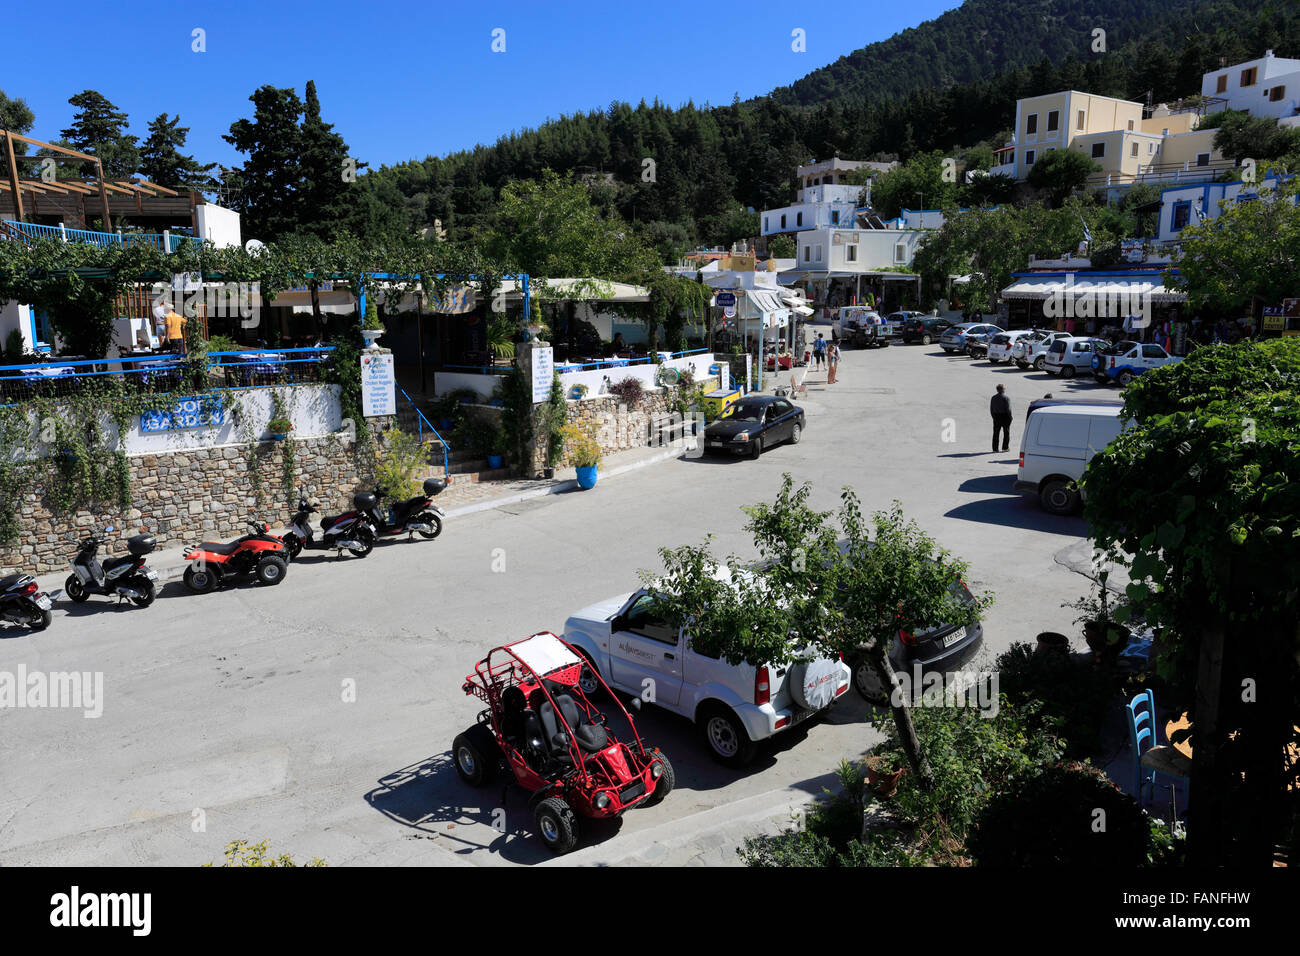 Overview of Zia village, Kos Island, Dodecanese group of islands, South Aegean Sea, Greece. Stock Photo